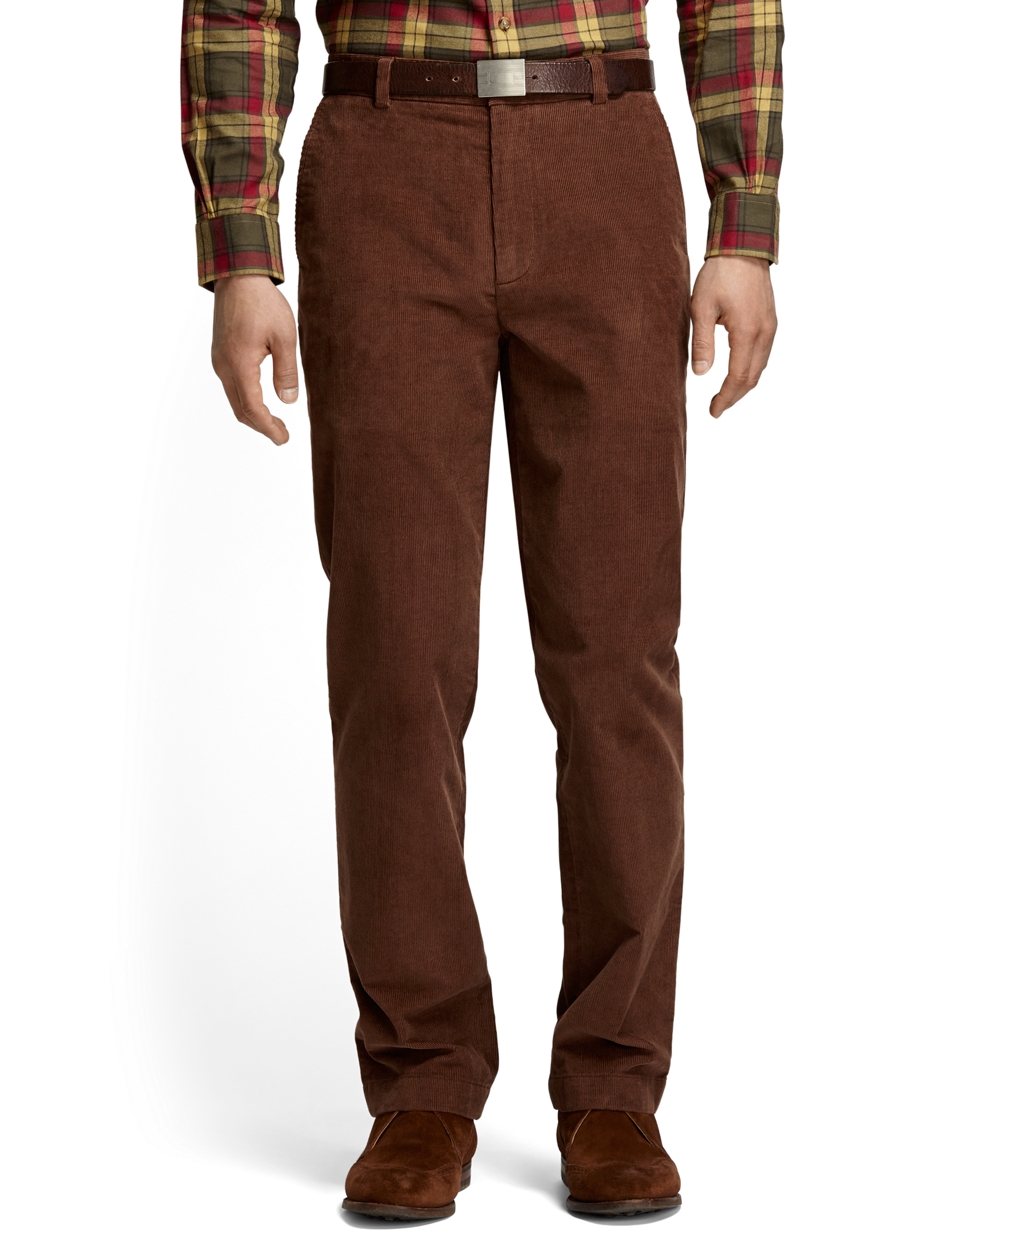 Lyst - Brooks brothers Clark 14wale Corduroy Pants in Brown for Men